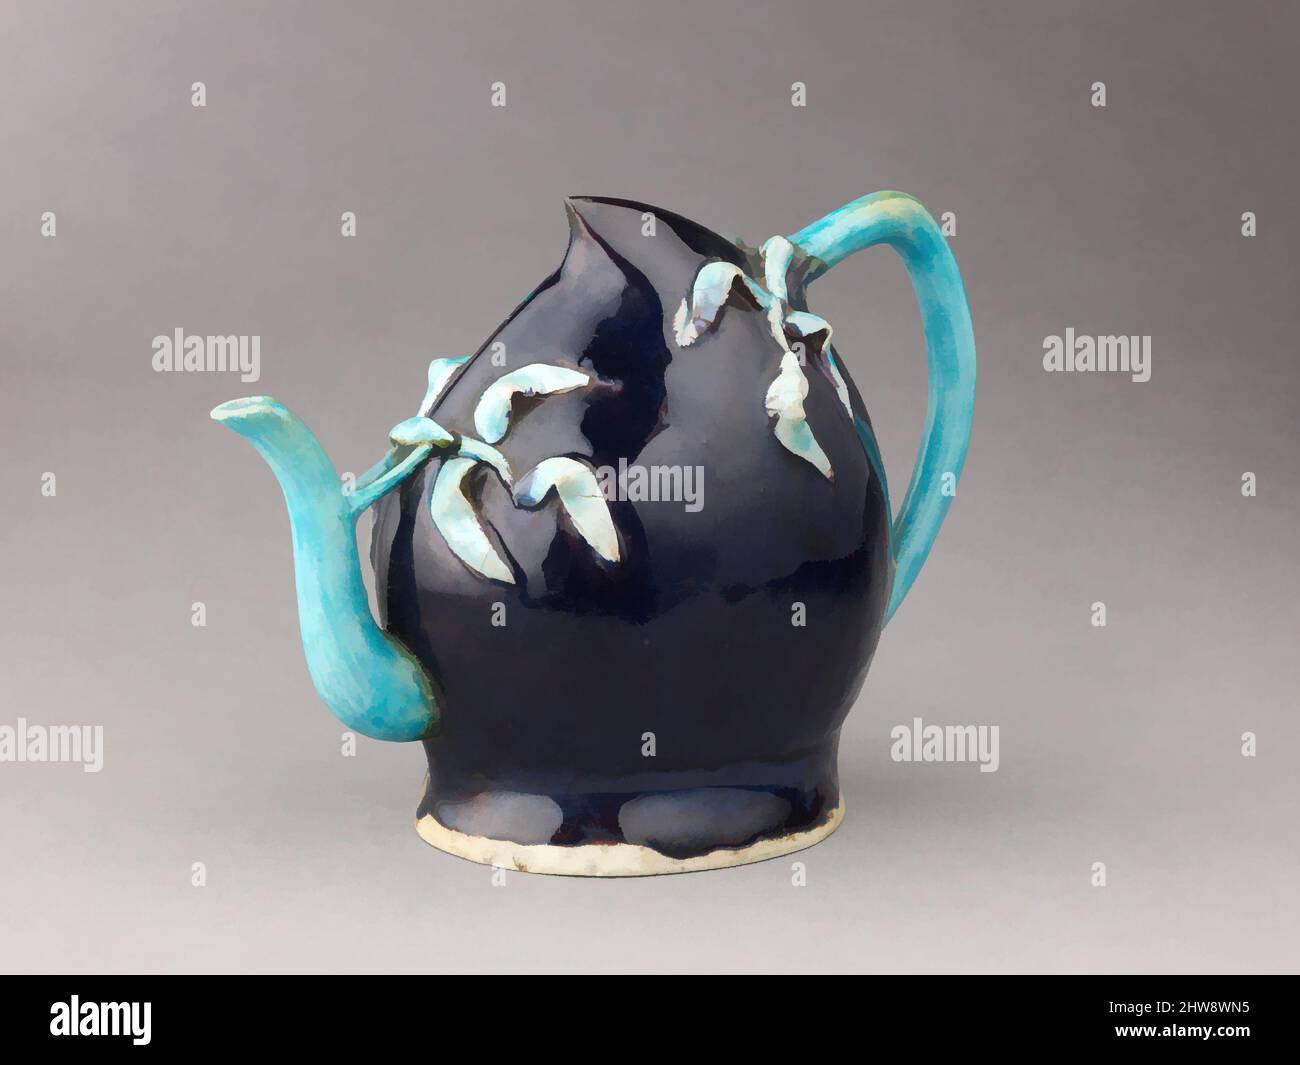 https://c8.alamy.com/comp/2HW8WN5/art-inspired-by-peach-shaped-wine-pot-or-teapot-ca-late-17th-century-chinese-porcelain-with-relief-decoration-under-polychrome-glazes-height-5-12-in-14-cm-ceramics-chinese-early-qing-dynasty-classic-works-modernized-by-artotop-with-a-splash-of-modernity-shapes-color-and-value-eye-catching-visual-impact-on-art-emotions-through-freedom-of-artworks-in-a-contemporary-way-a-timeless-message-pursuing-a-wildly-creative-new-direction-artists-turning-to-the-digital-medium-and-creating-the-artotop-nft-2HW8WN5.jpg